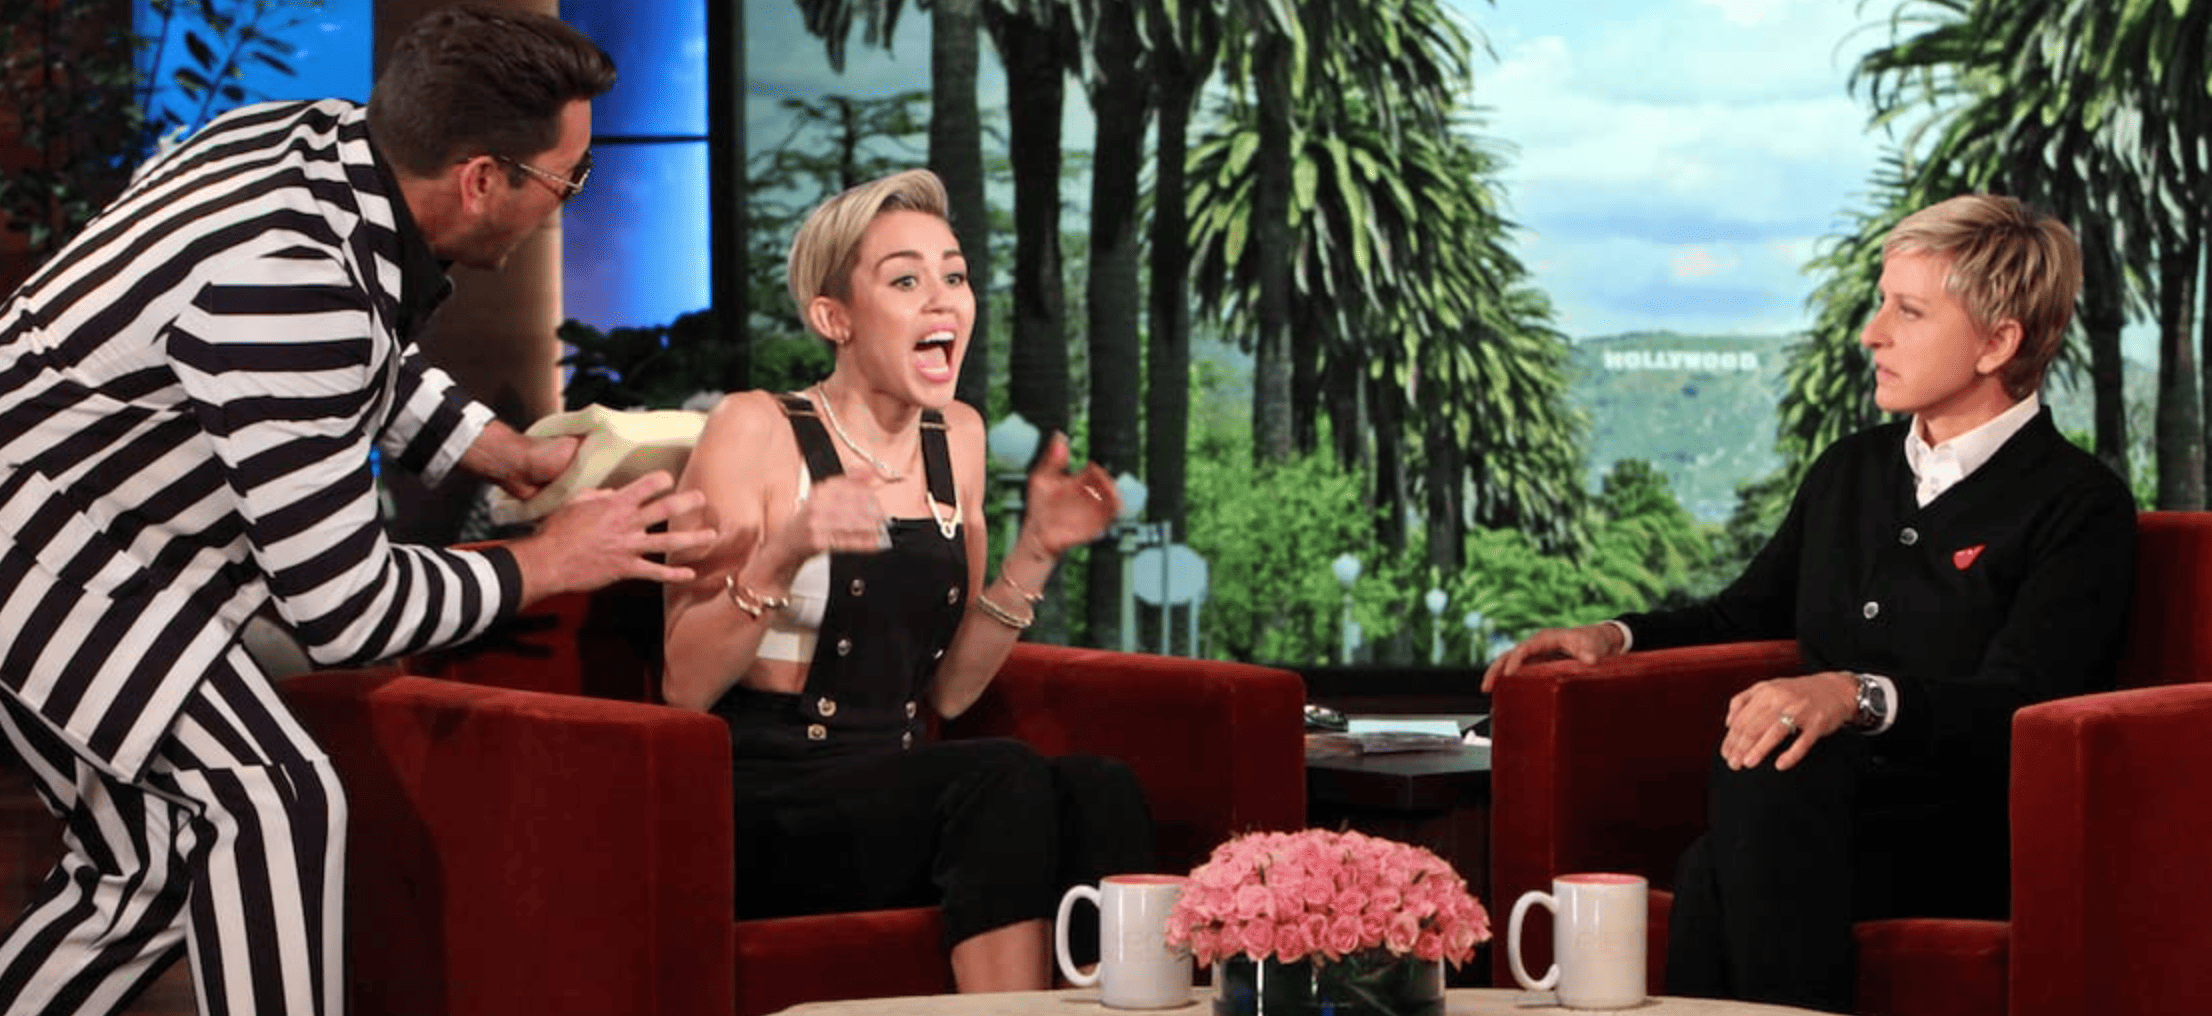 Ellen DeGeneres sitting on her signature couch next to a startled Miley Cyrus in this image from A Very Good Production